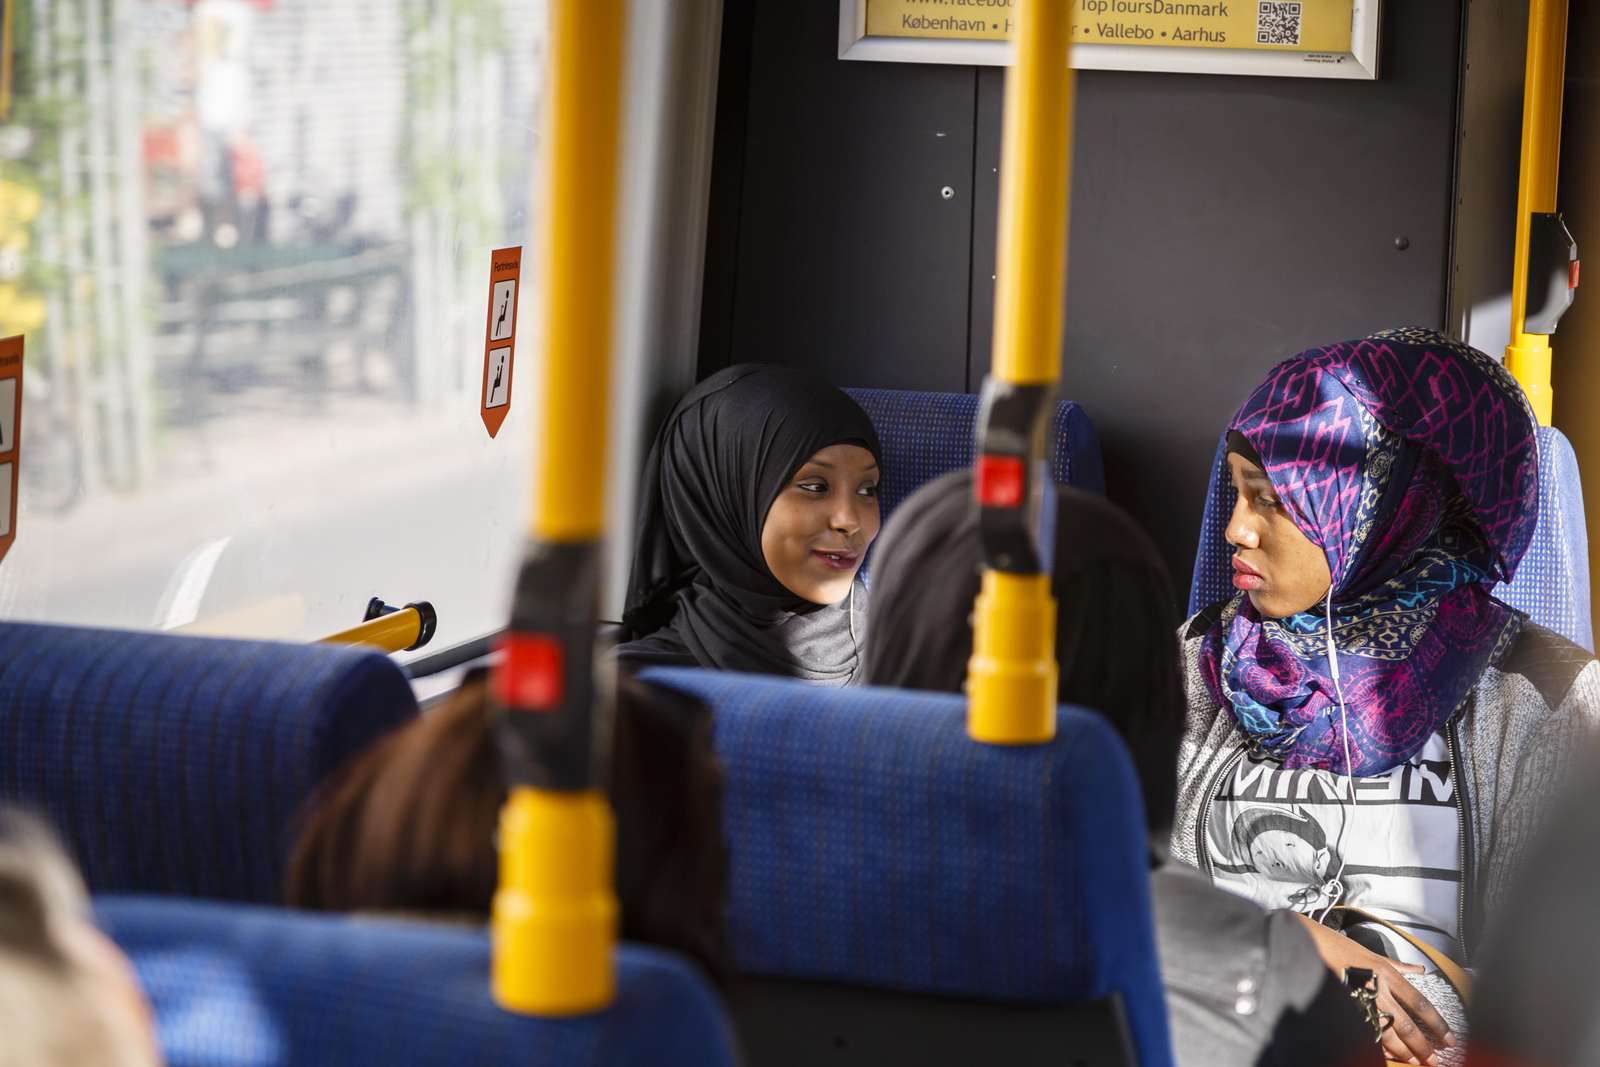 Two women sitting on a bus